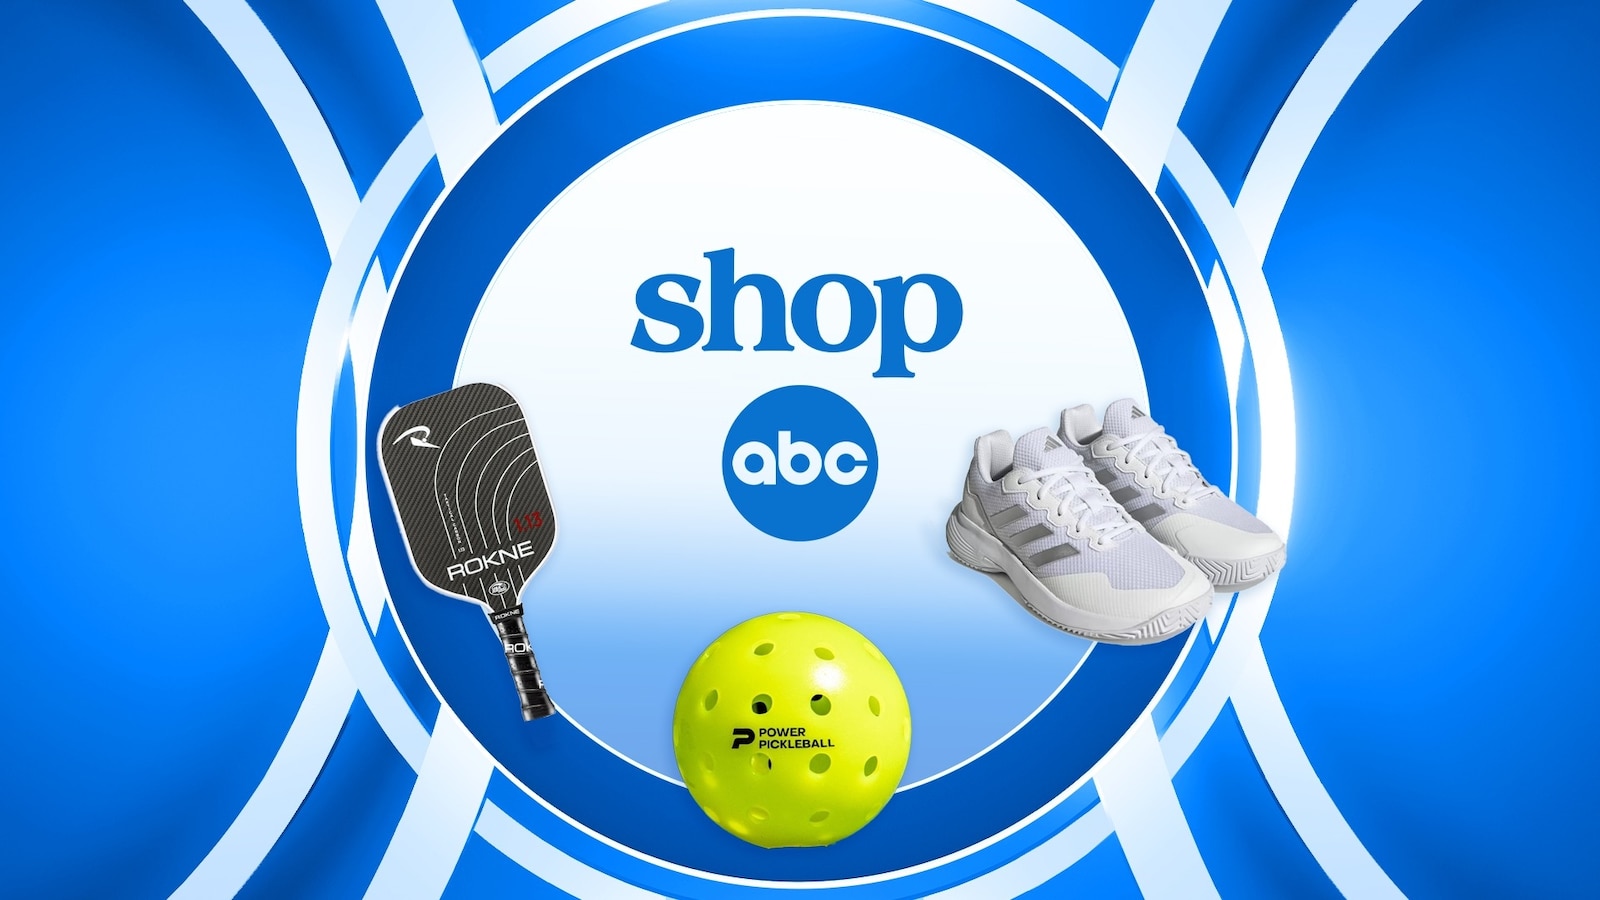 Shop pickleball gear to start gameplay today [Video]